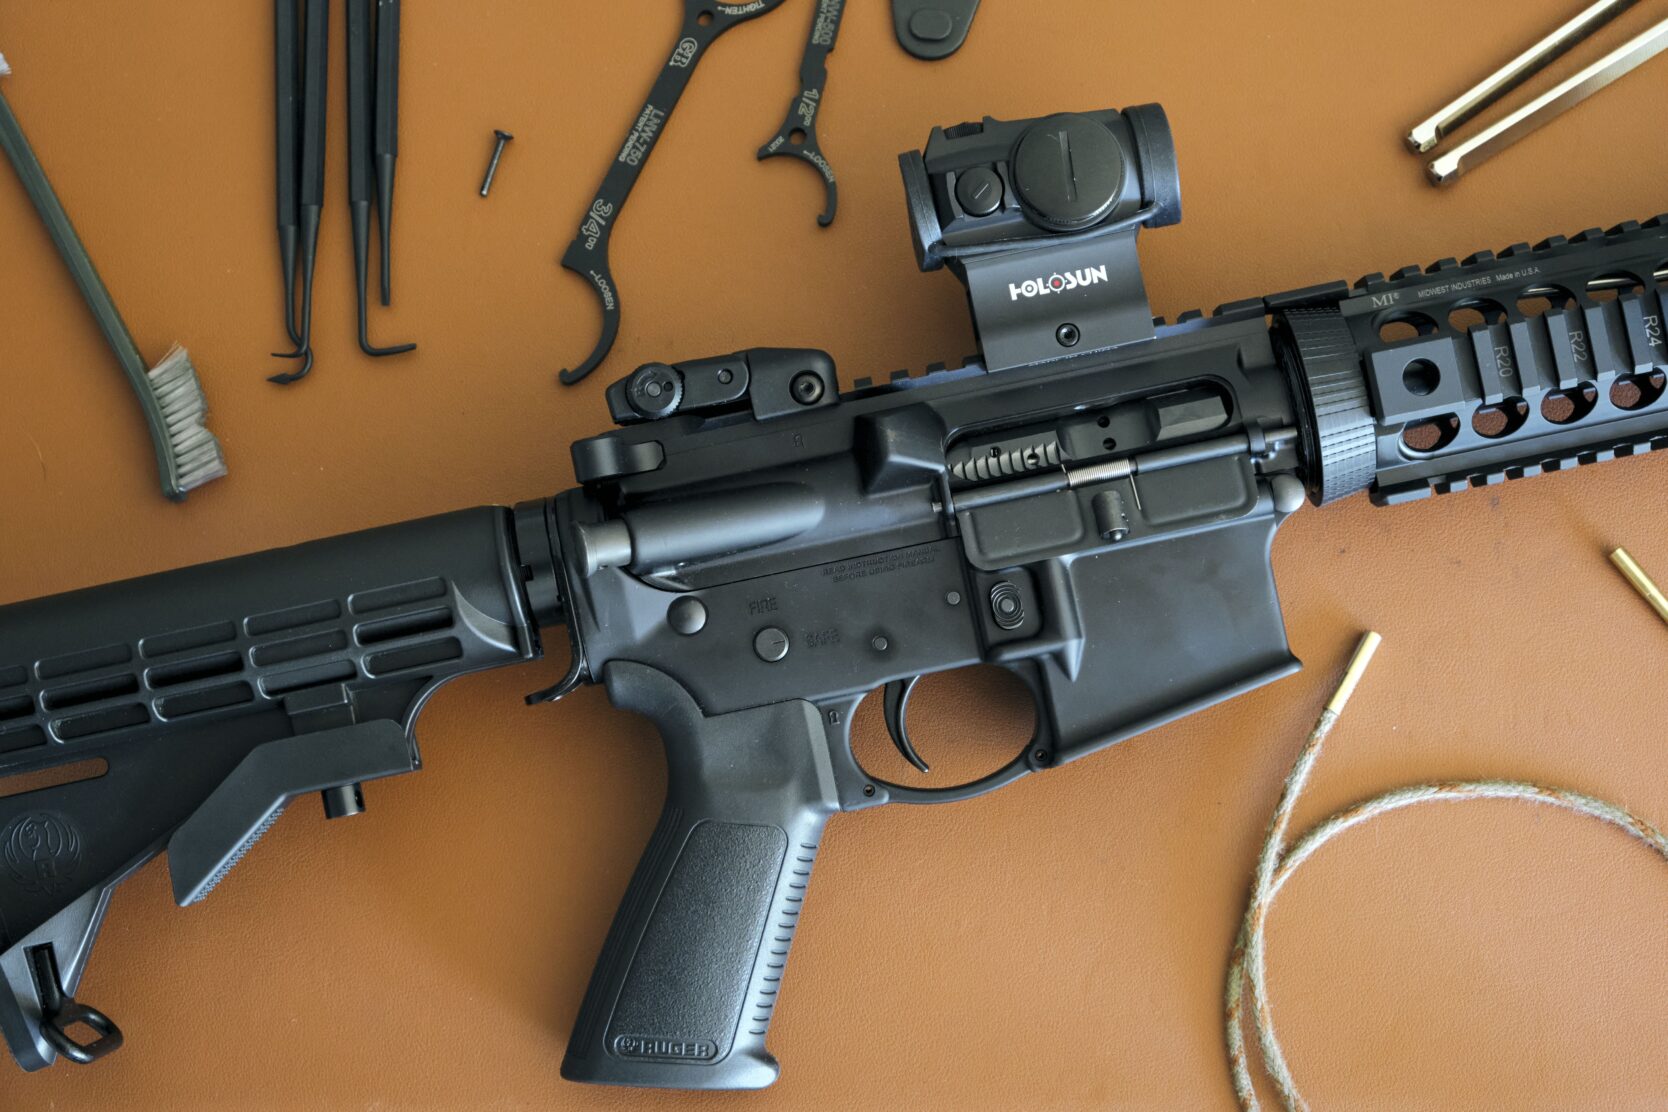 Looking for this furniture kit *Google image* : r/ar15